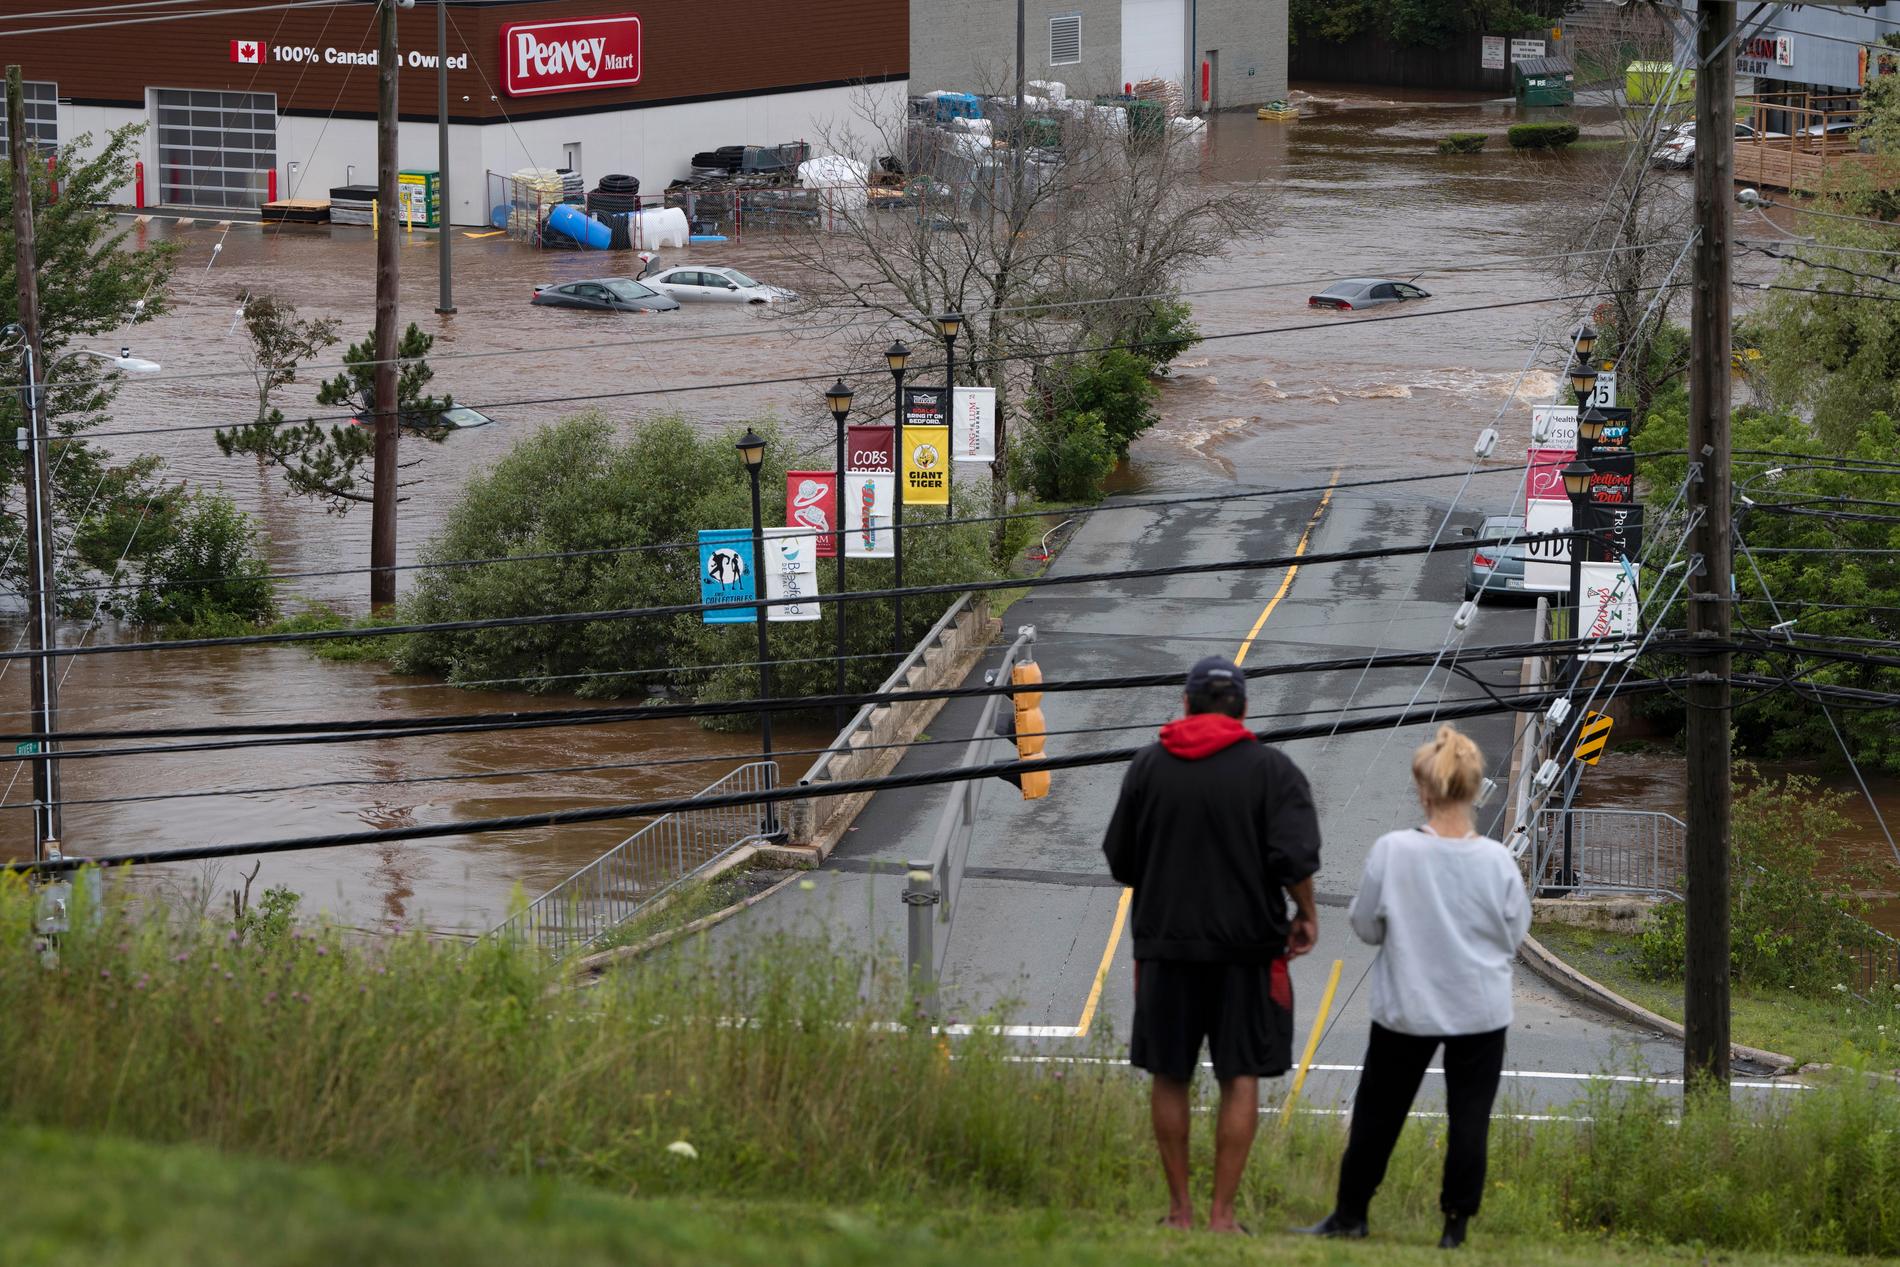 Canada Hit by Severe Floods: – Of Biblical Proportions